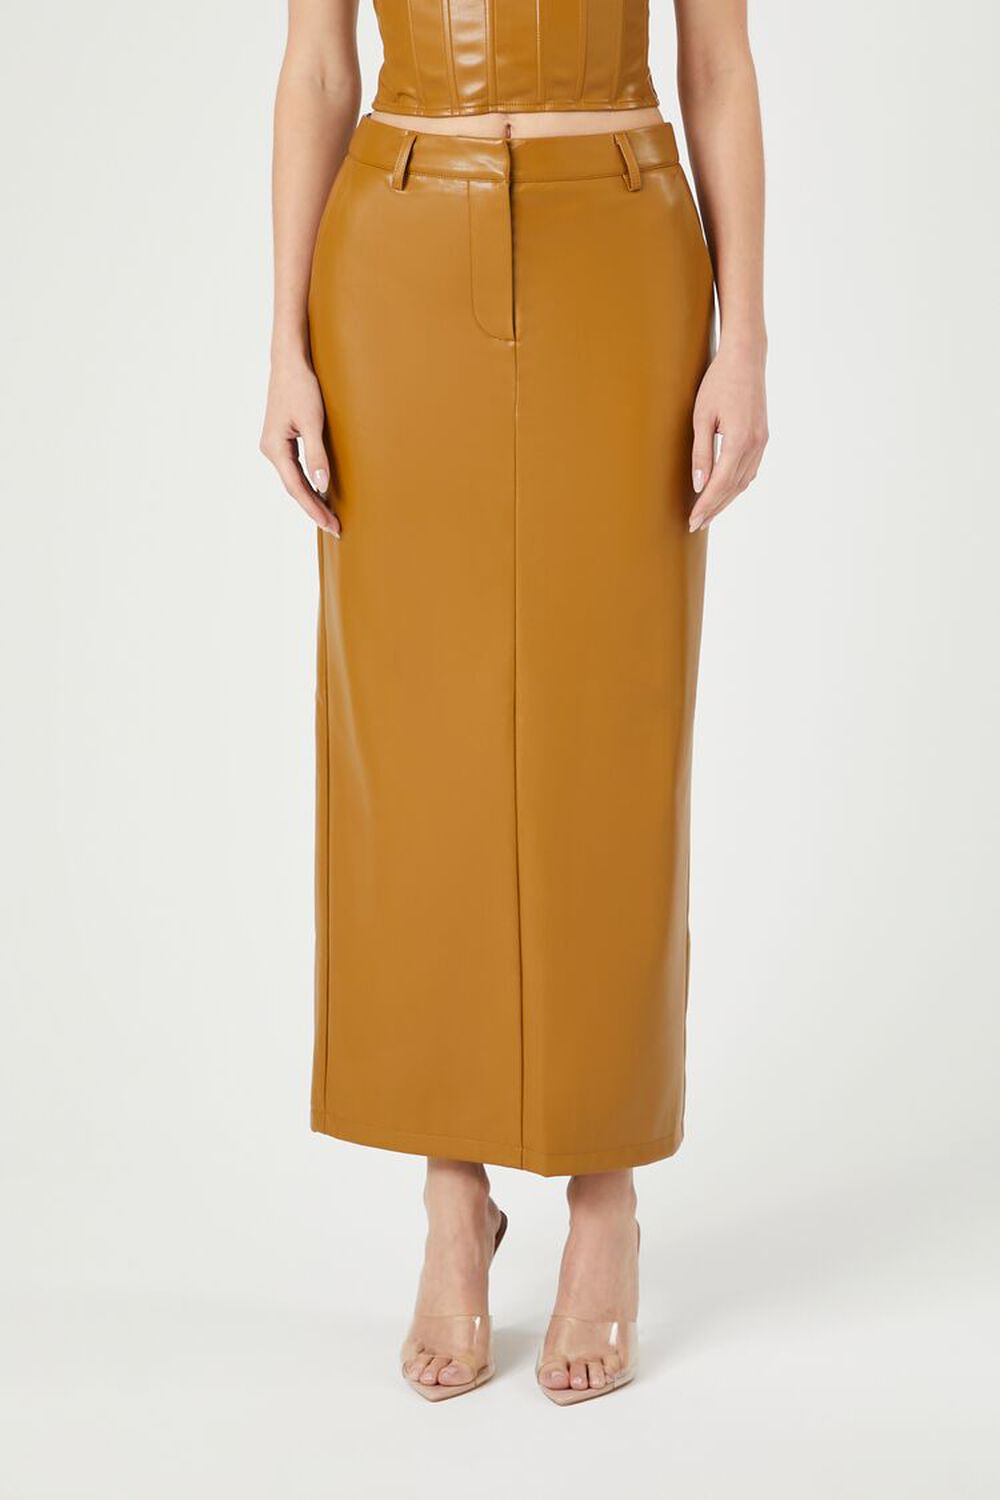 FOREVER 21 Brown Faux Leather Pencil Skirt